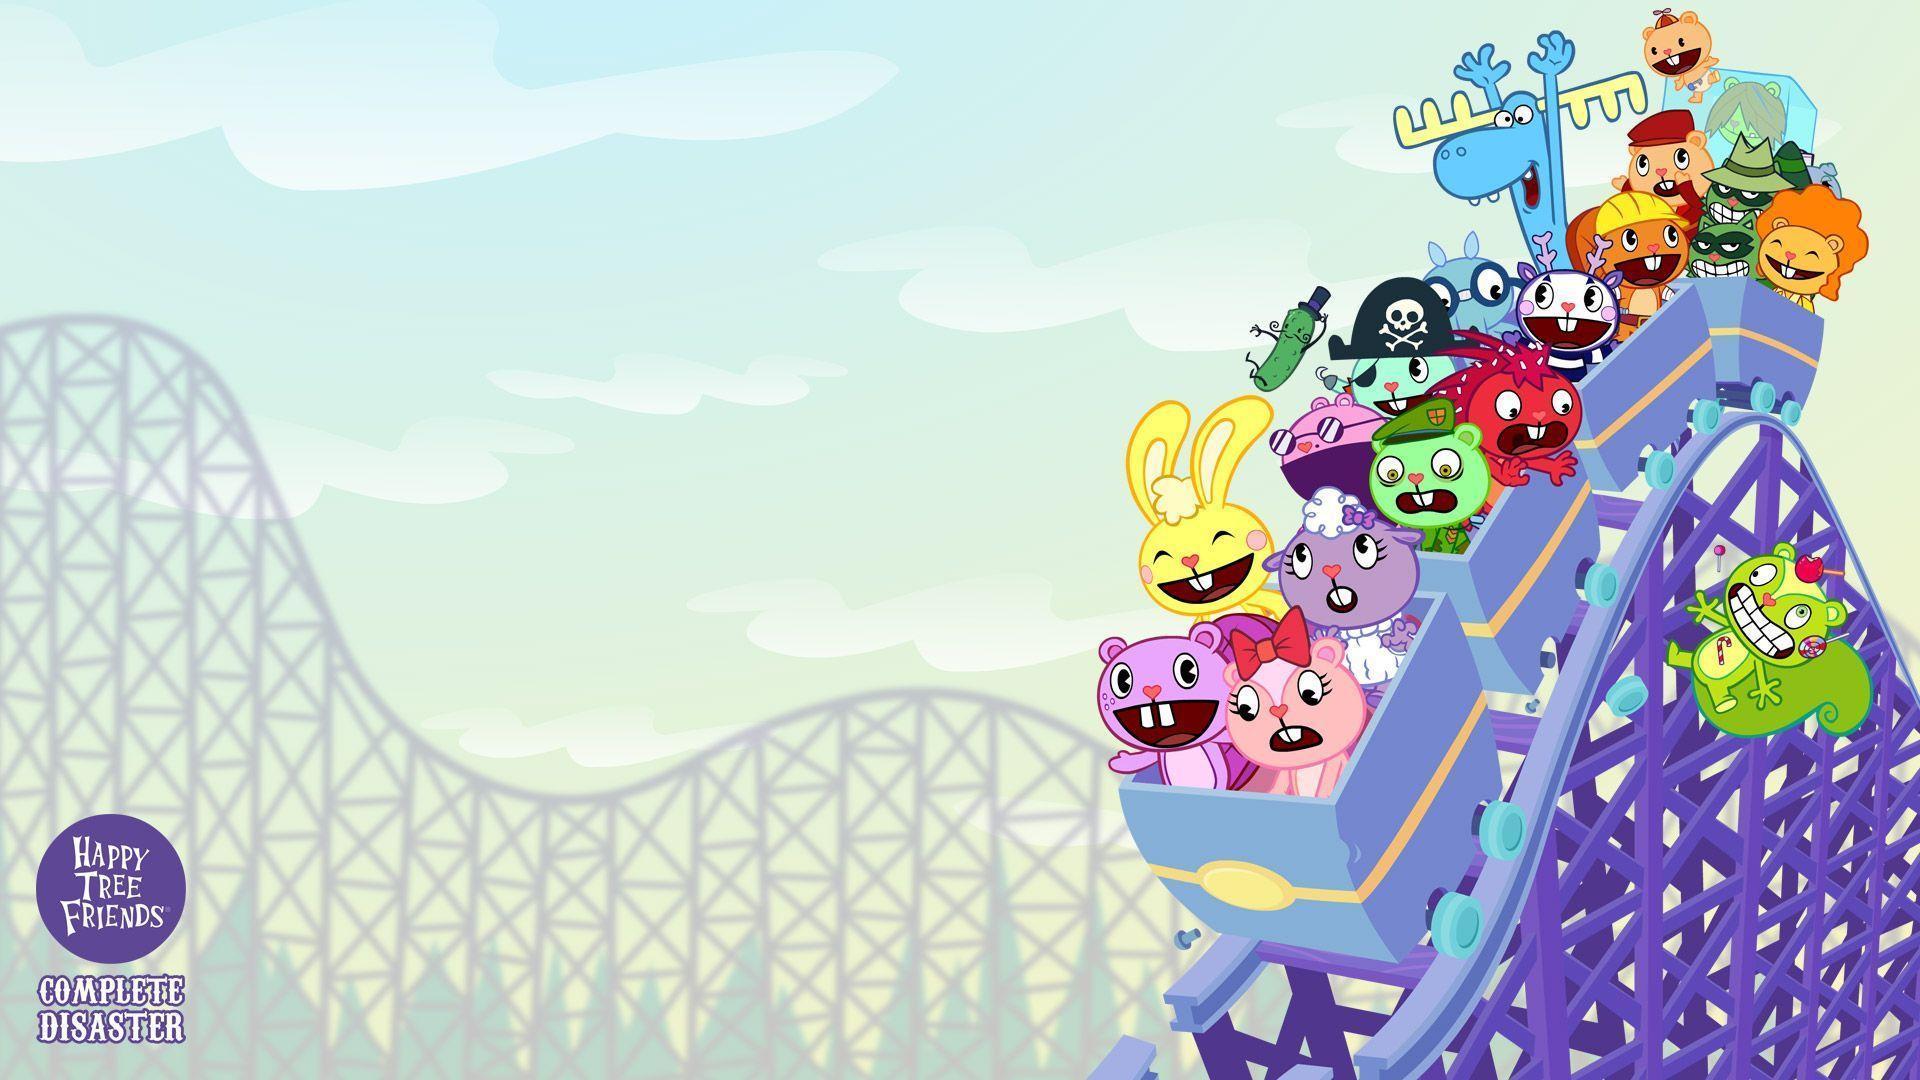 Happy Tree Friends: Complete Disaster Wallpapers